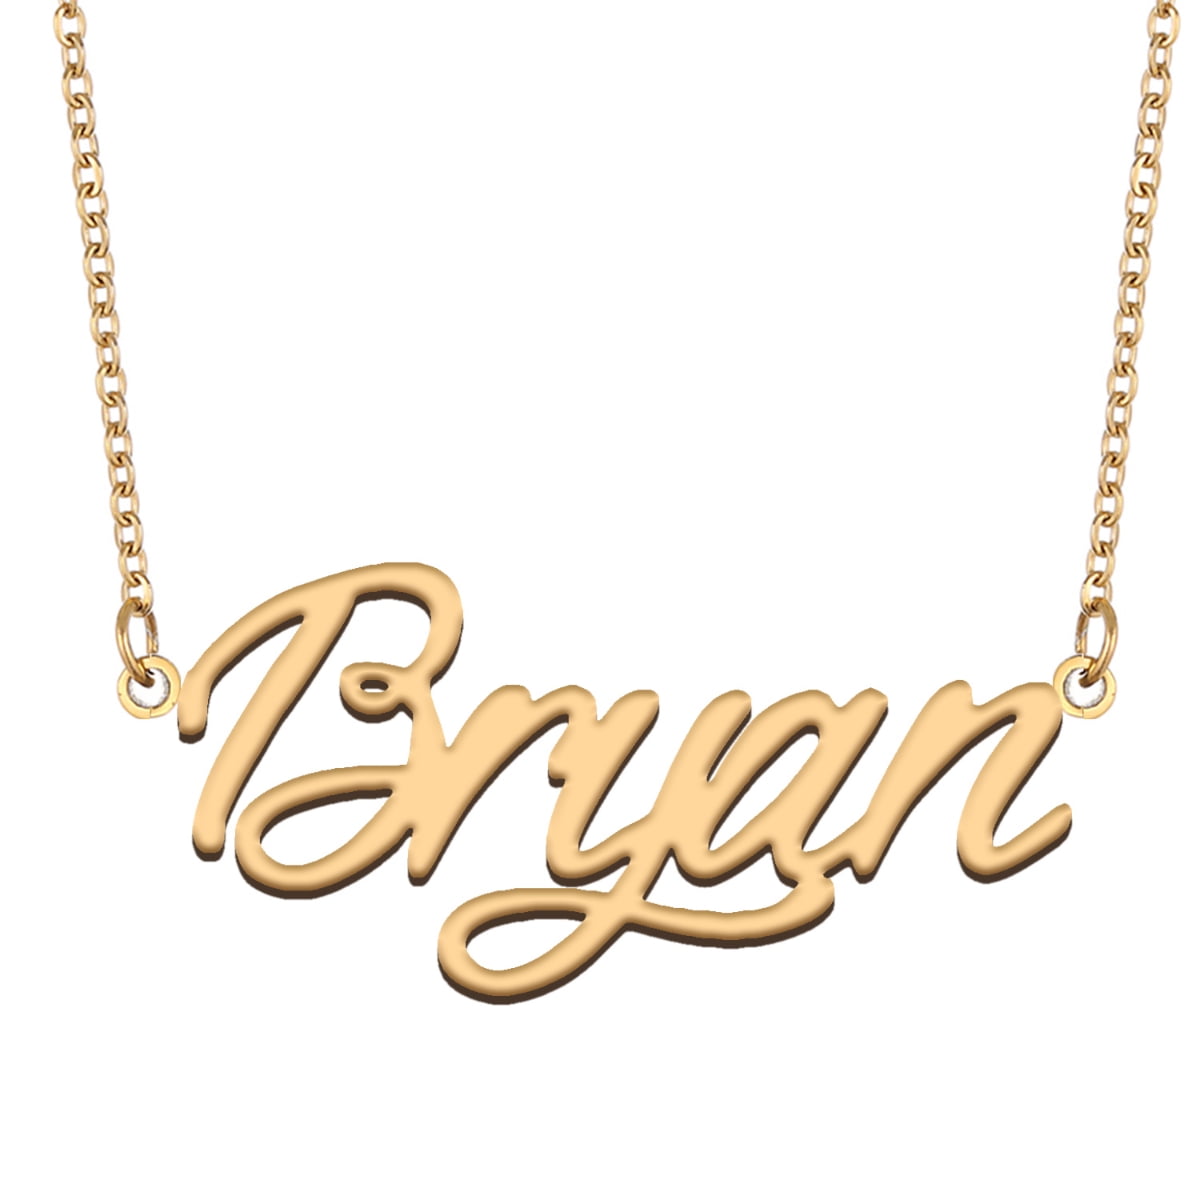 Name Chain Christmas Gifts Jewelry 18K Gold Plated Necklace With Name DANIELA